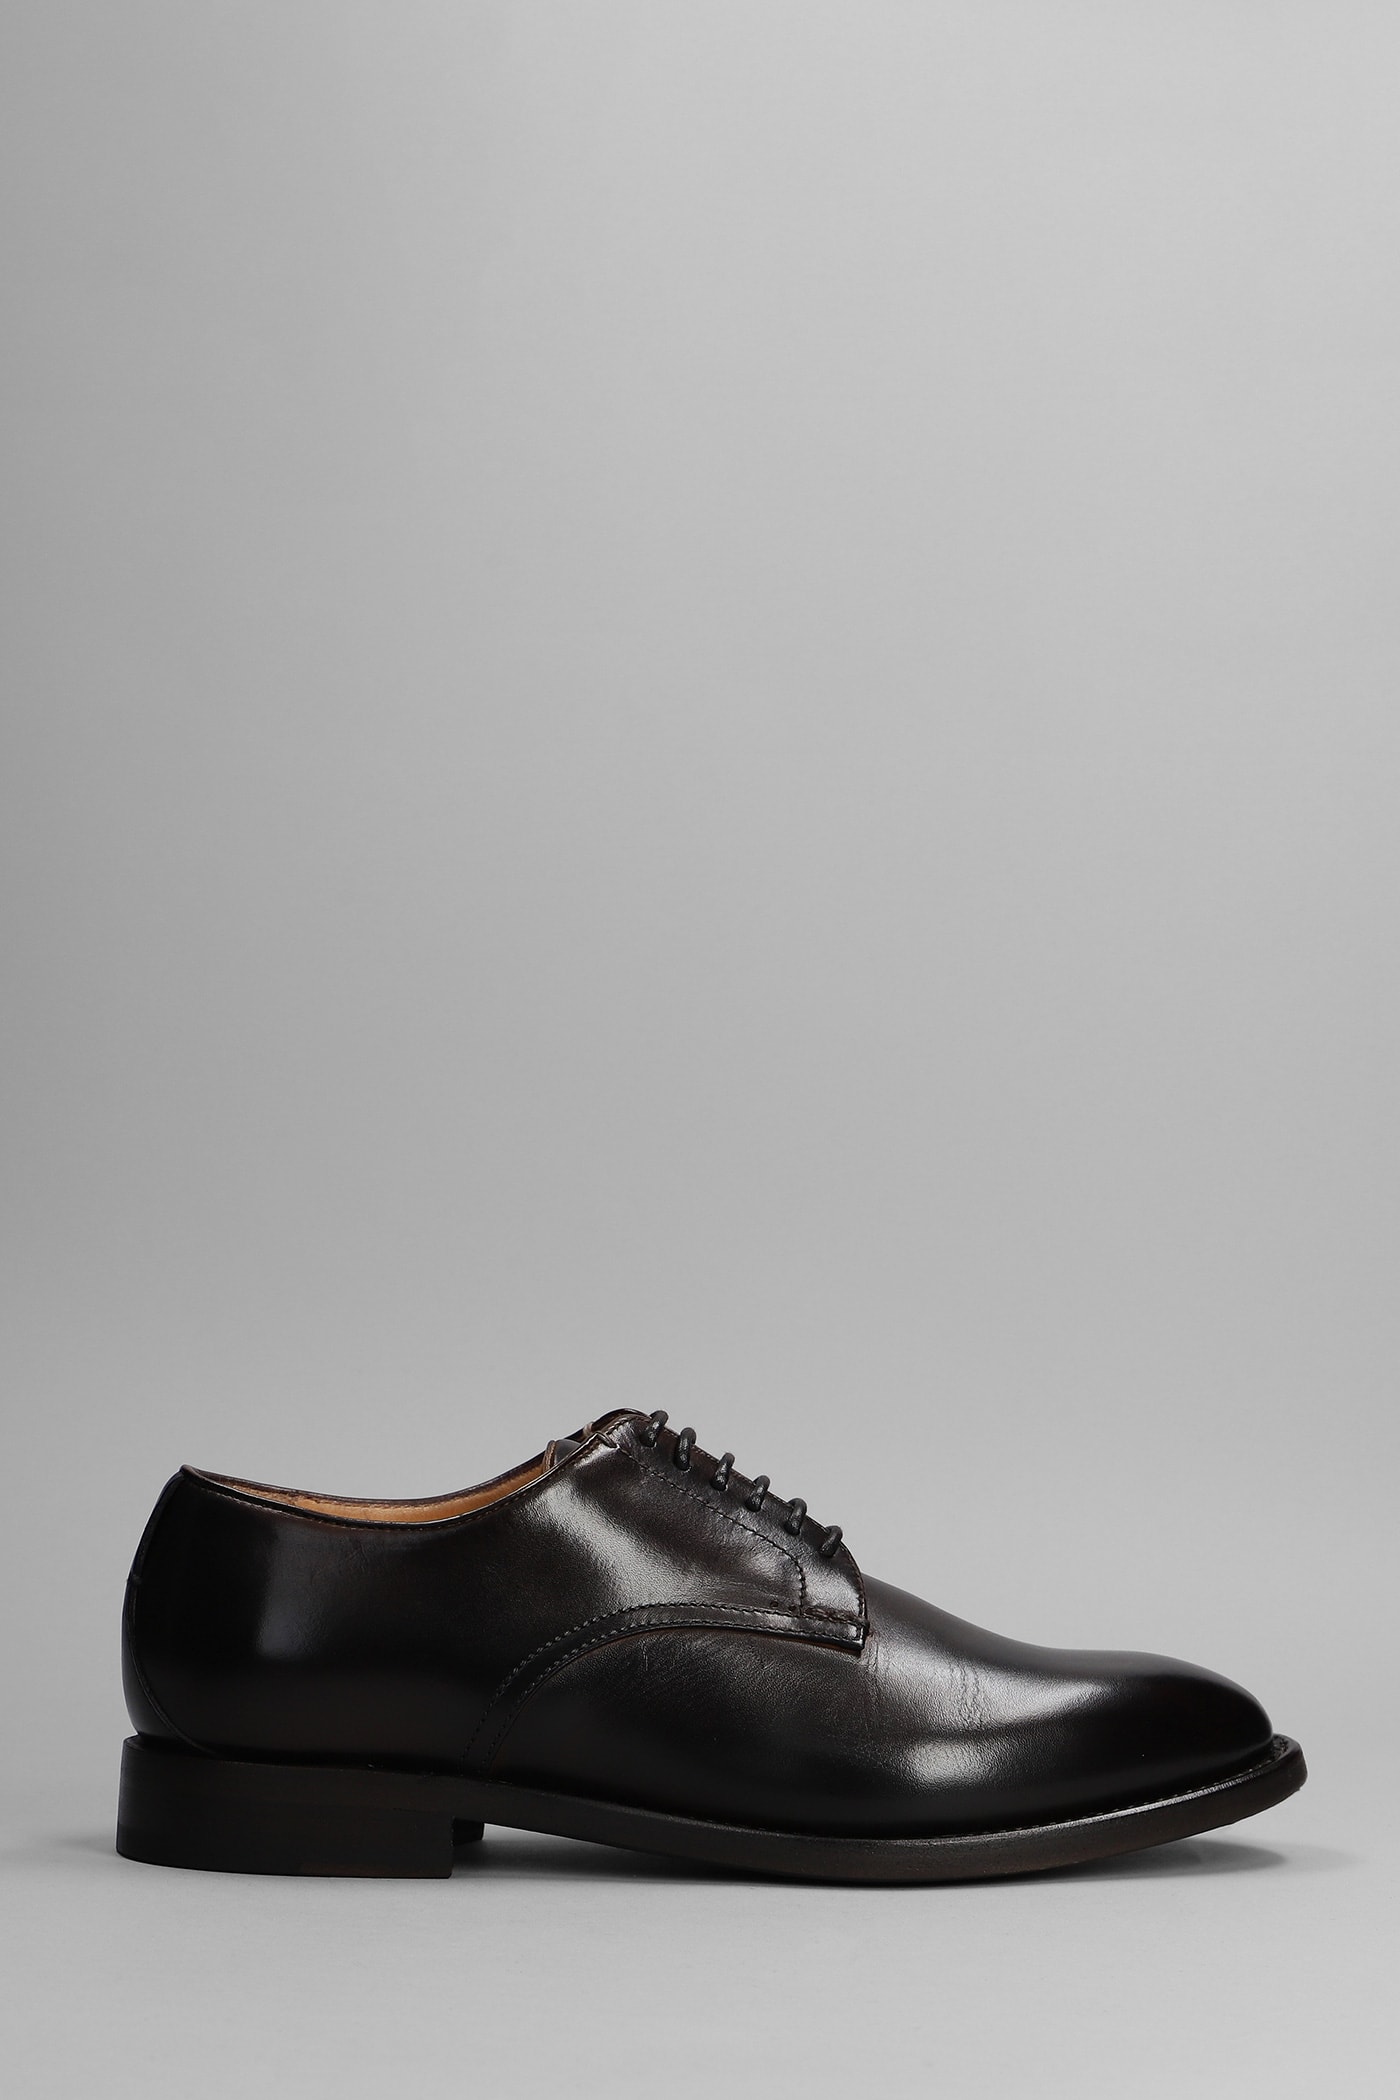 Silvano Sassetti Lace Up Shoes In Dark Brown Leather